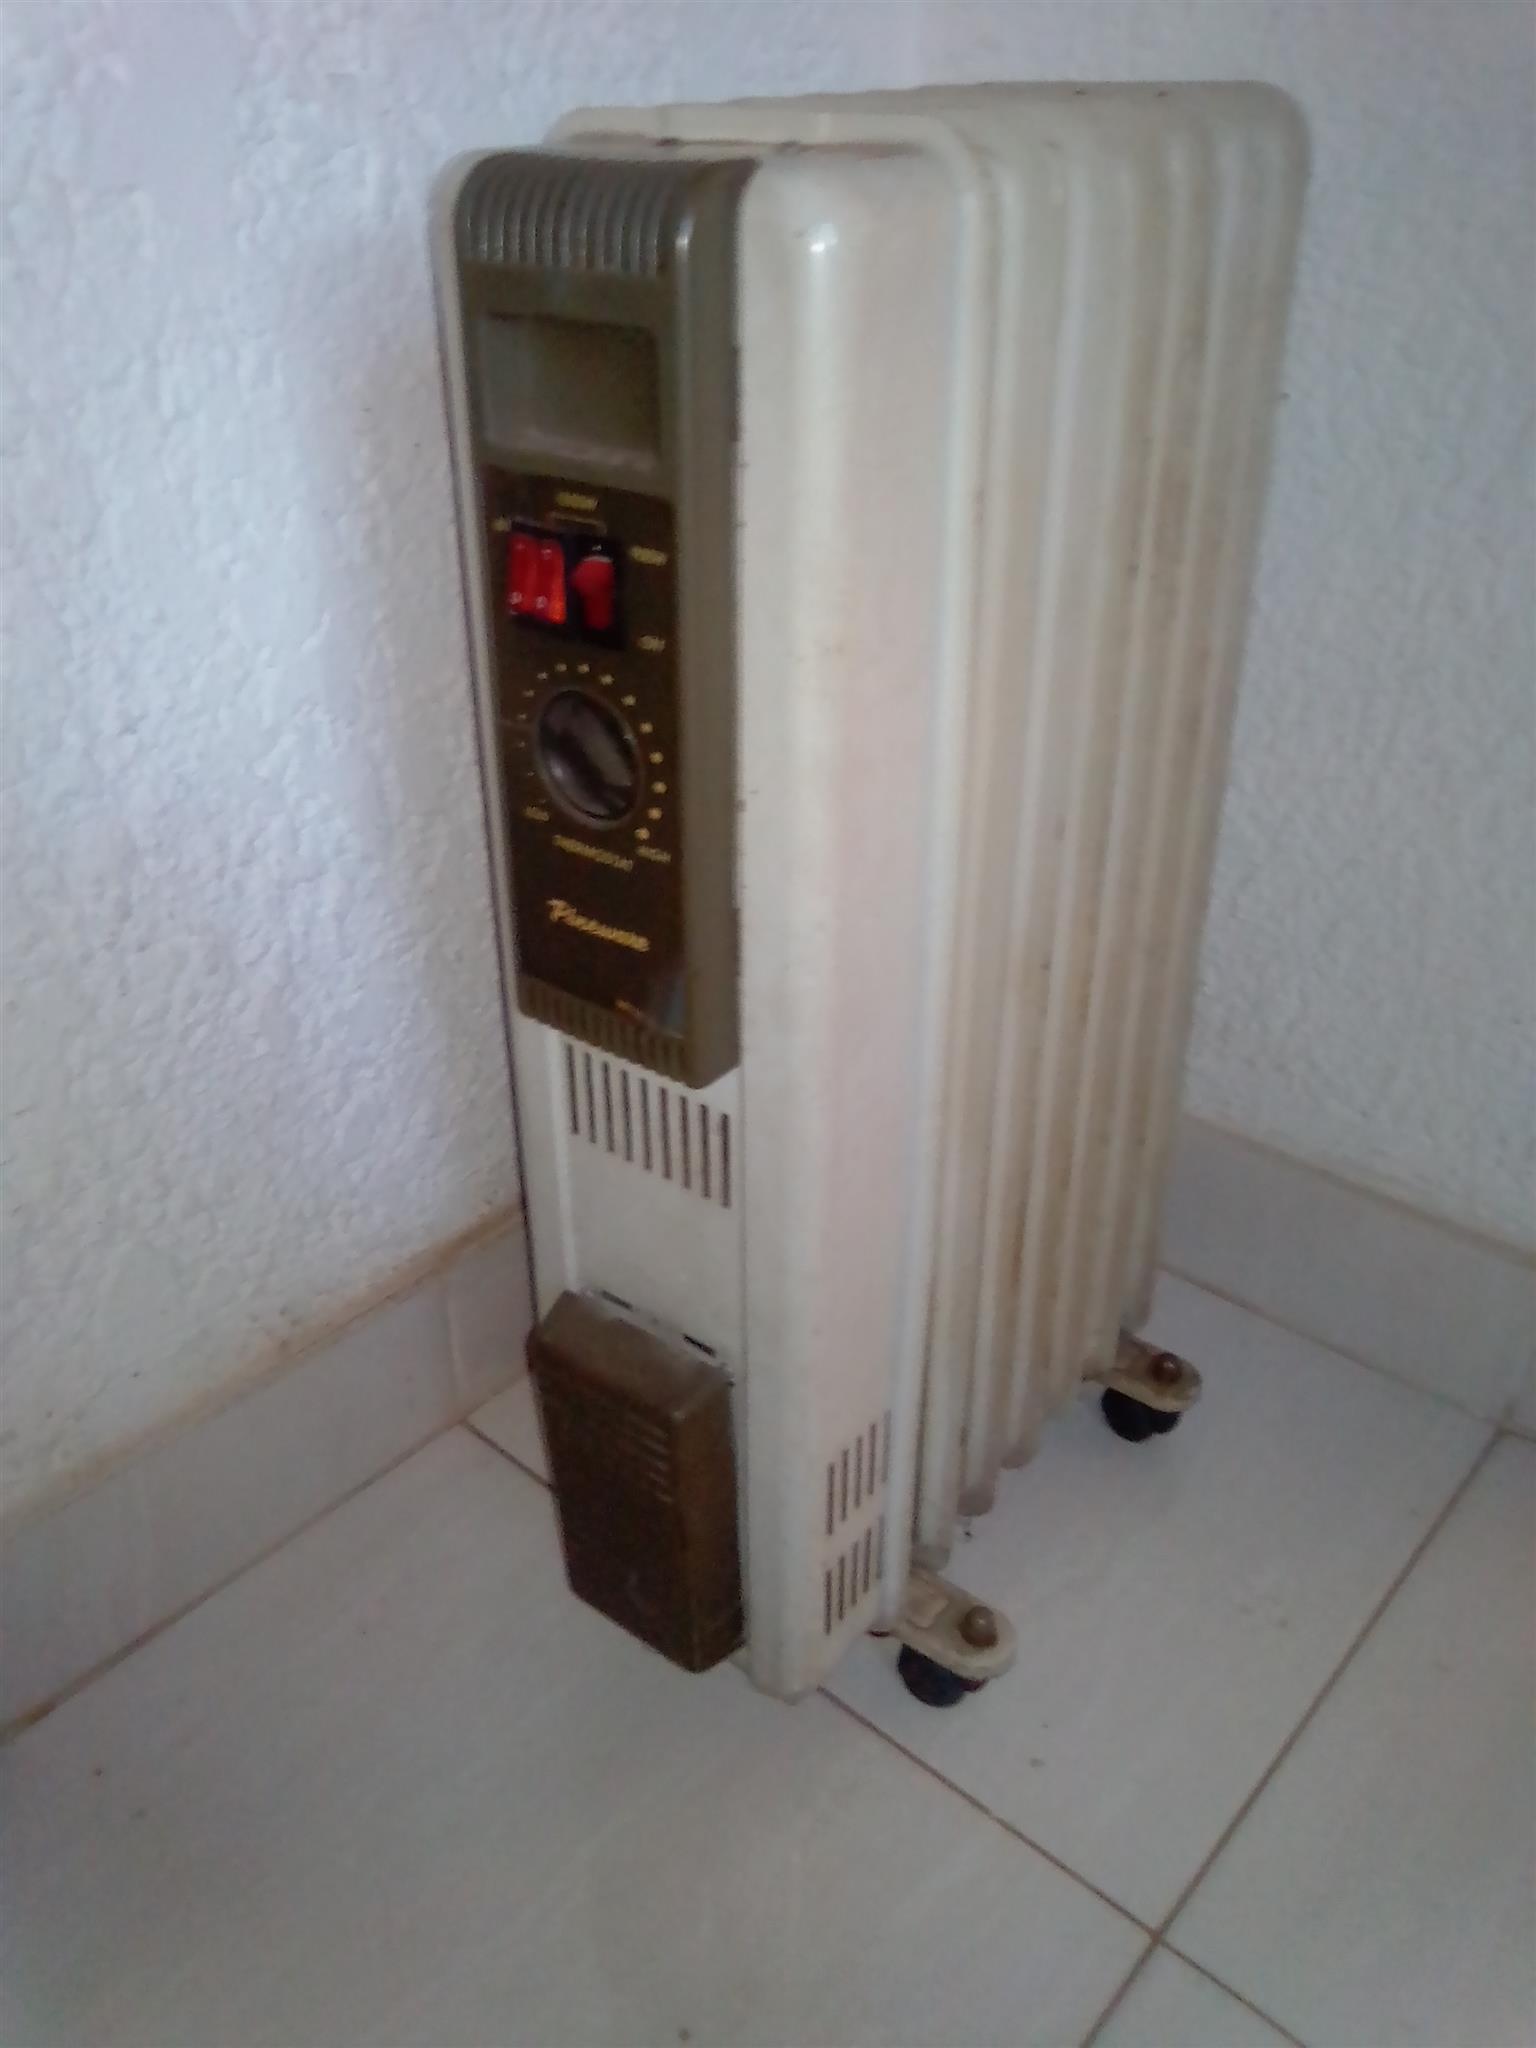 7 fin electric oil heater. Heats the room very fast.